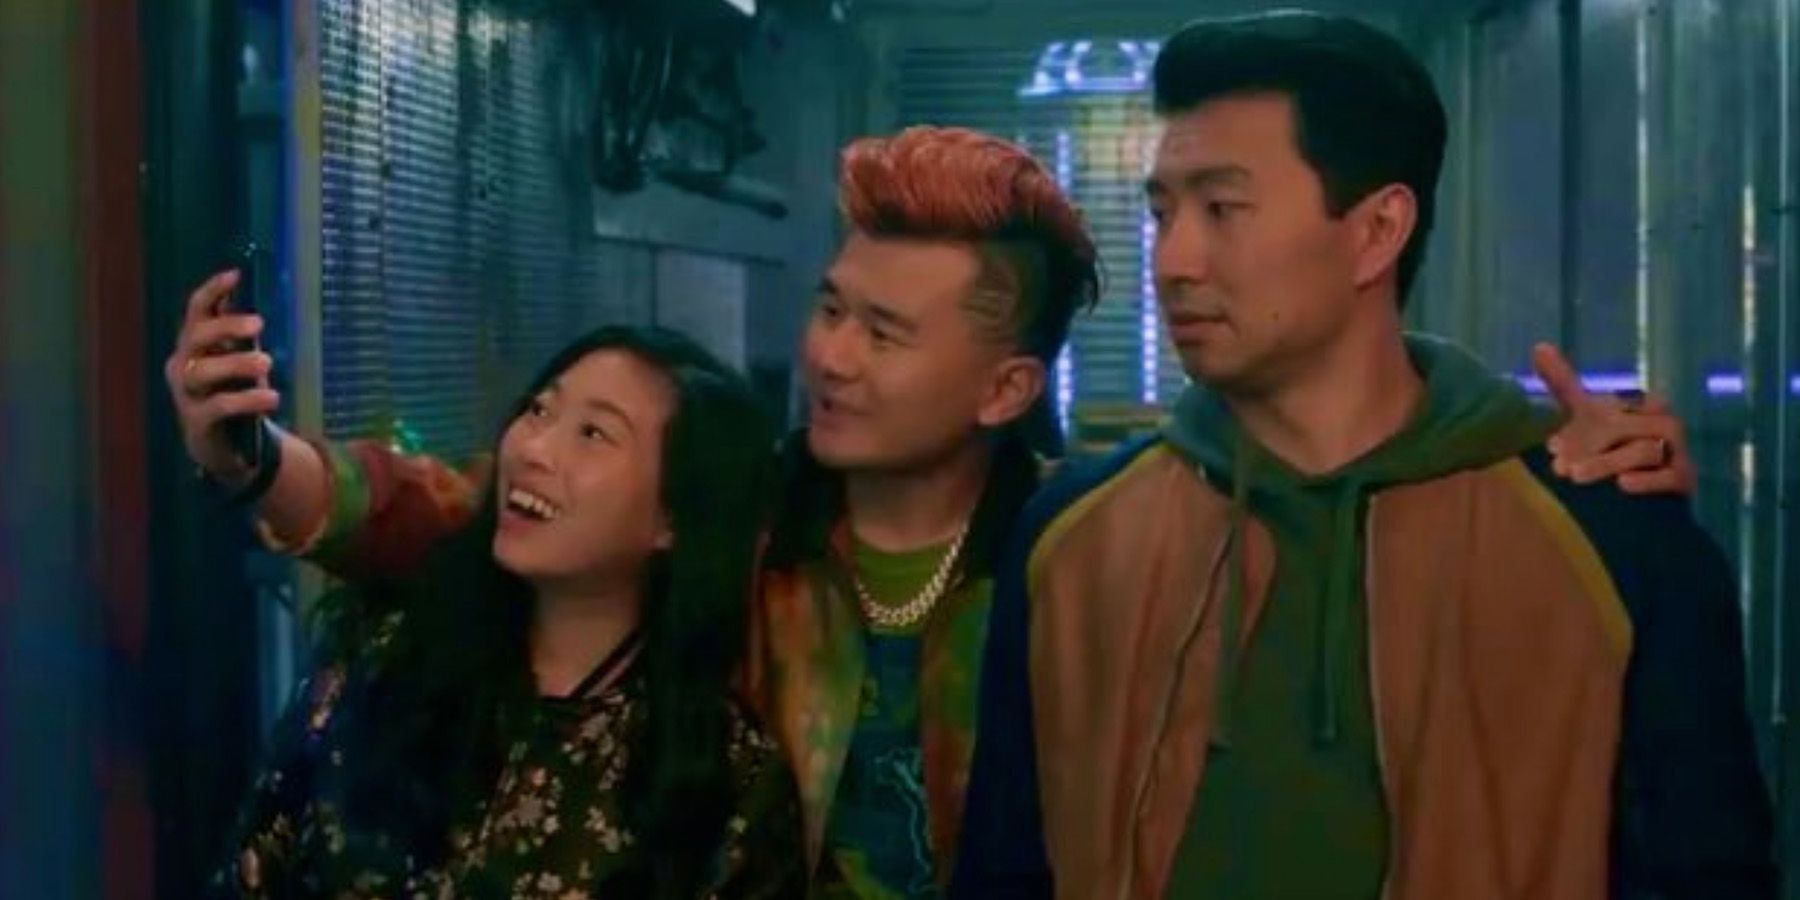 shang-chi with friends Awkwafina and Ronny Chieng